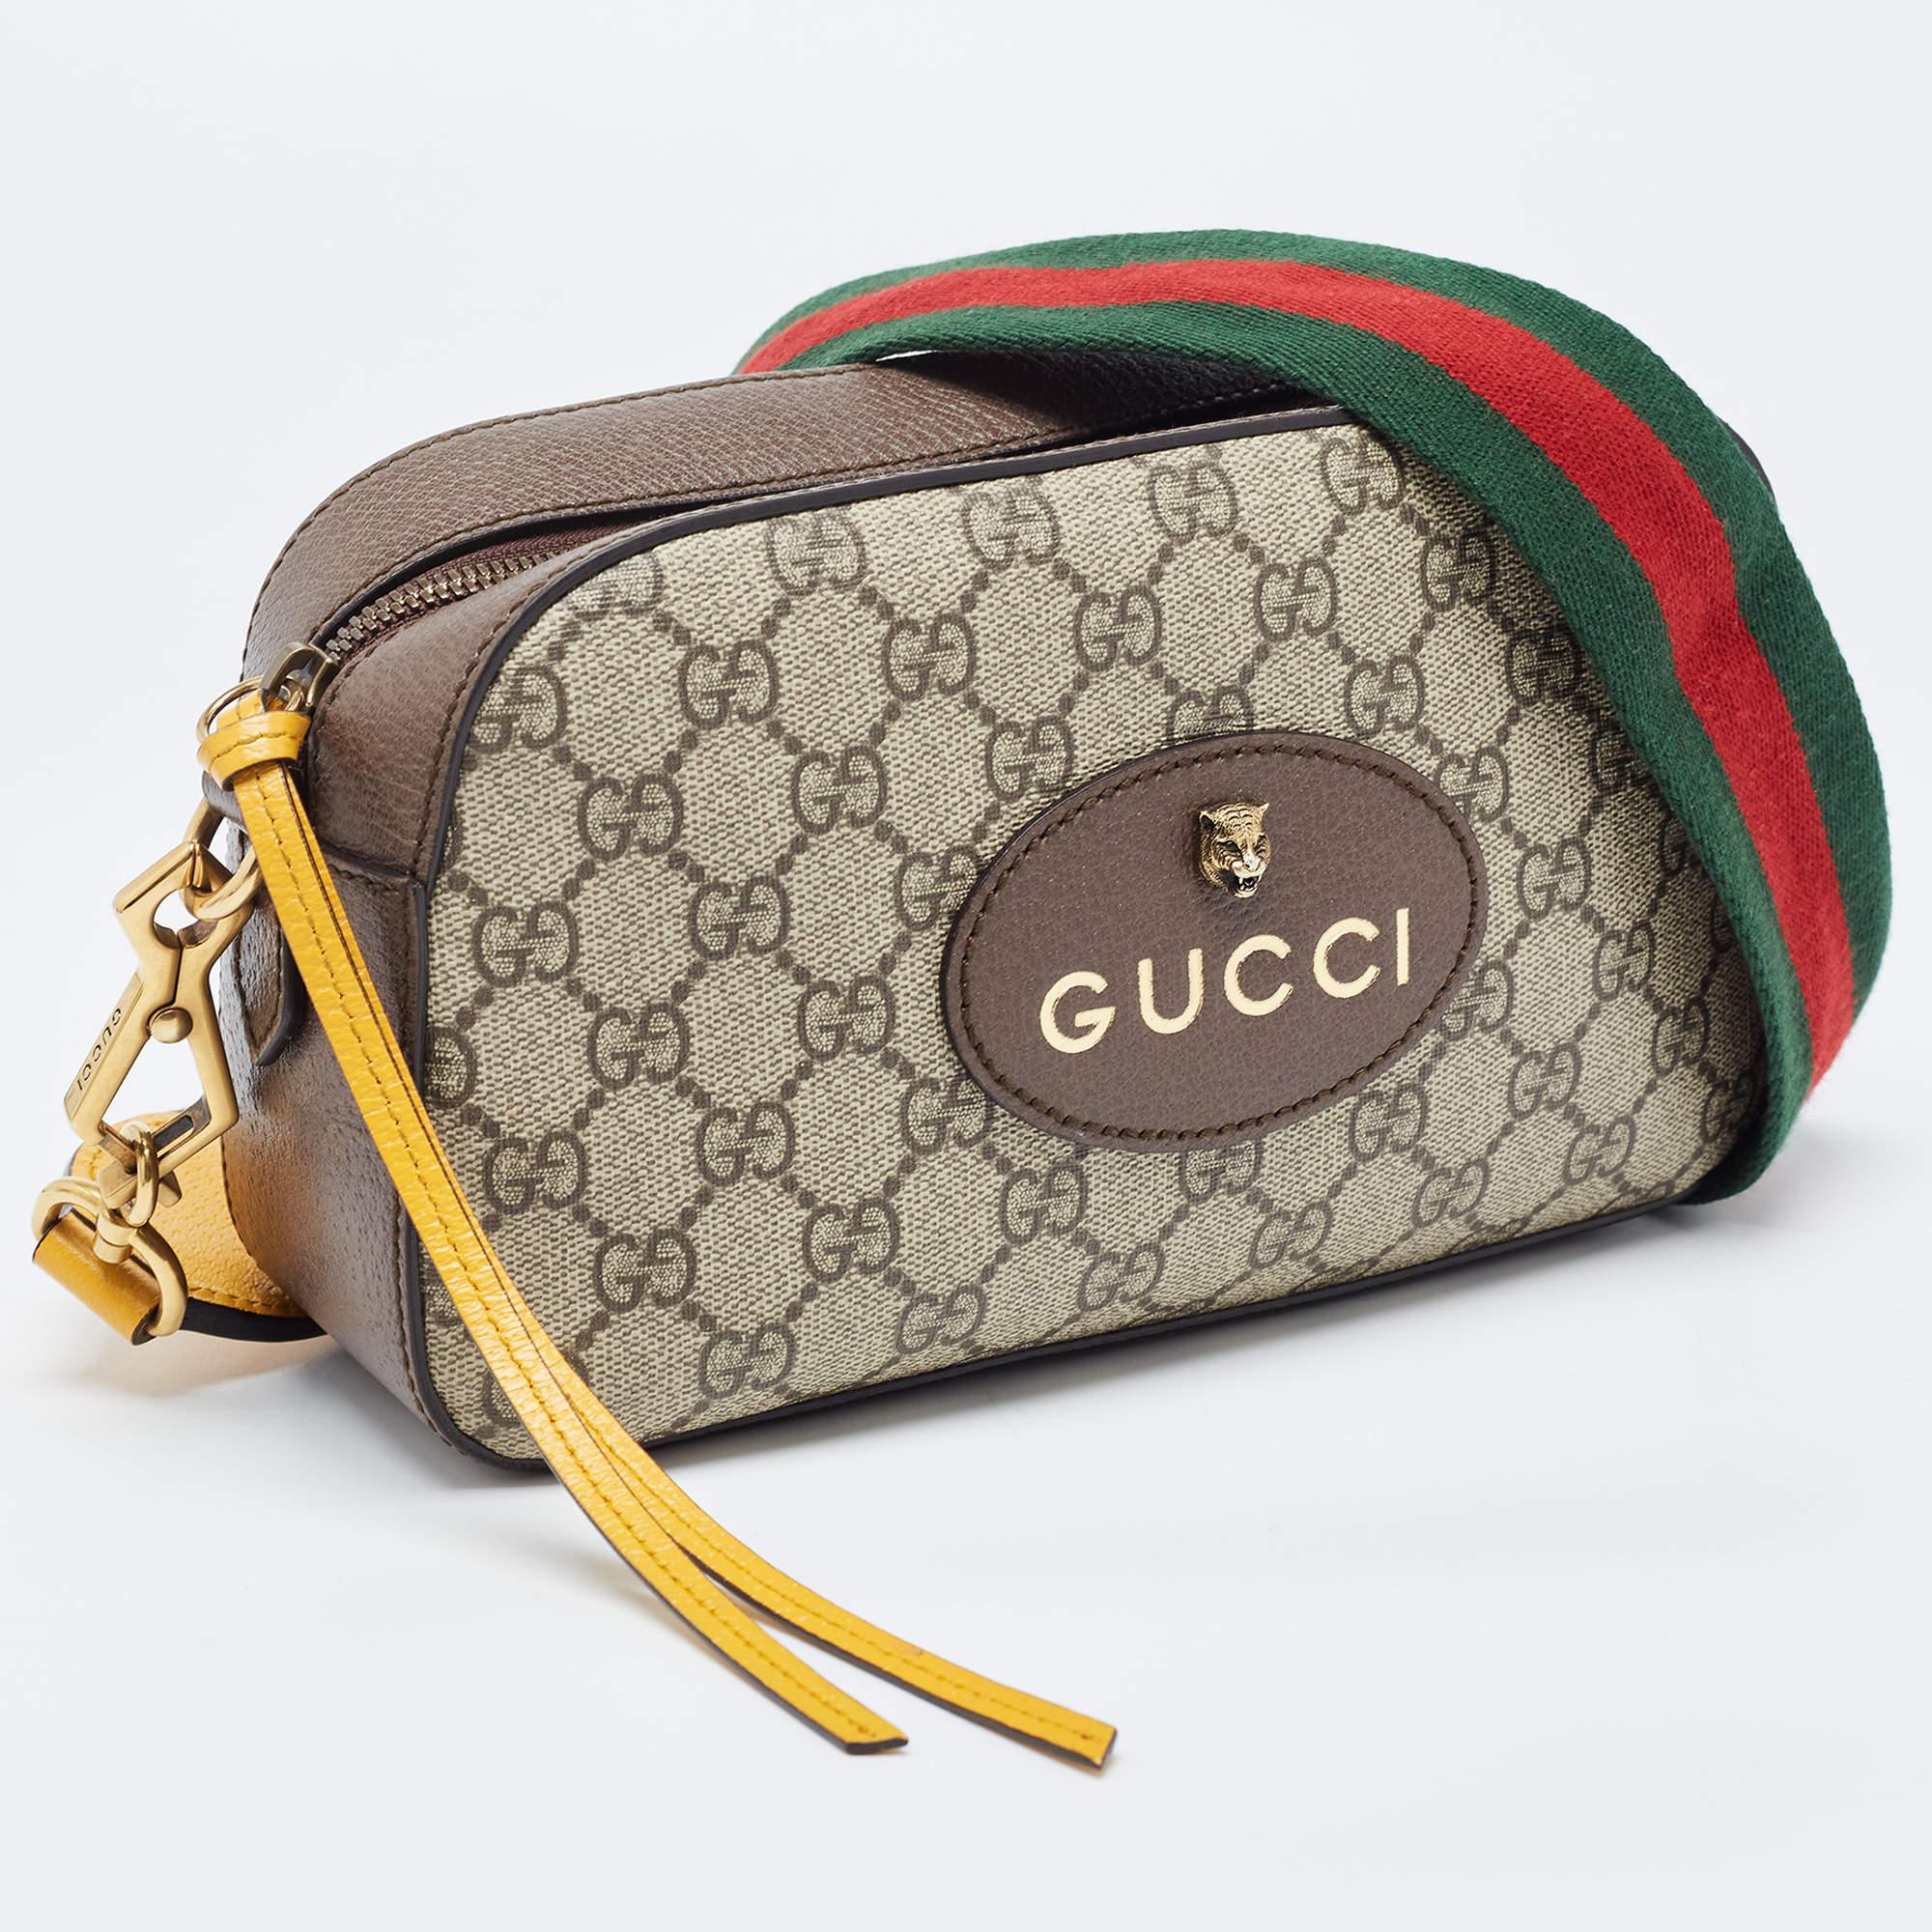 The Gucci Neo Vintage Messenger Bag showcases the iconic GG monogram on durable canvas. With a vintage-inspired design, it features a spacious interior, adjustable shoulder strap, leather trim, and antique gold-tone hardware, epitomizing luxury and